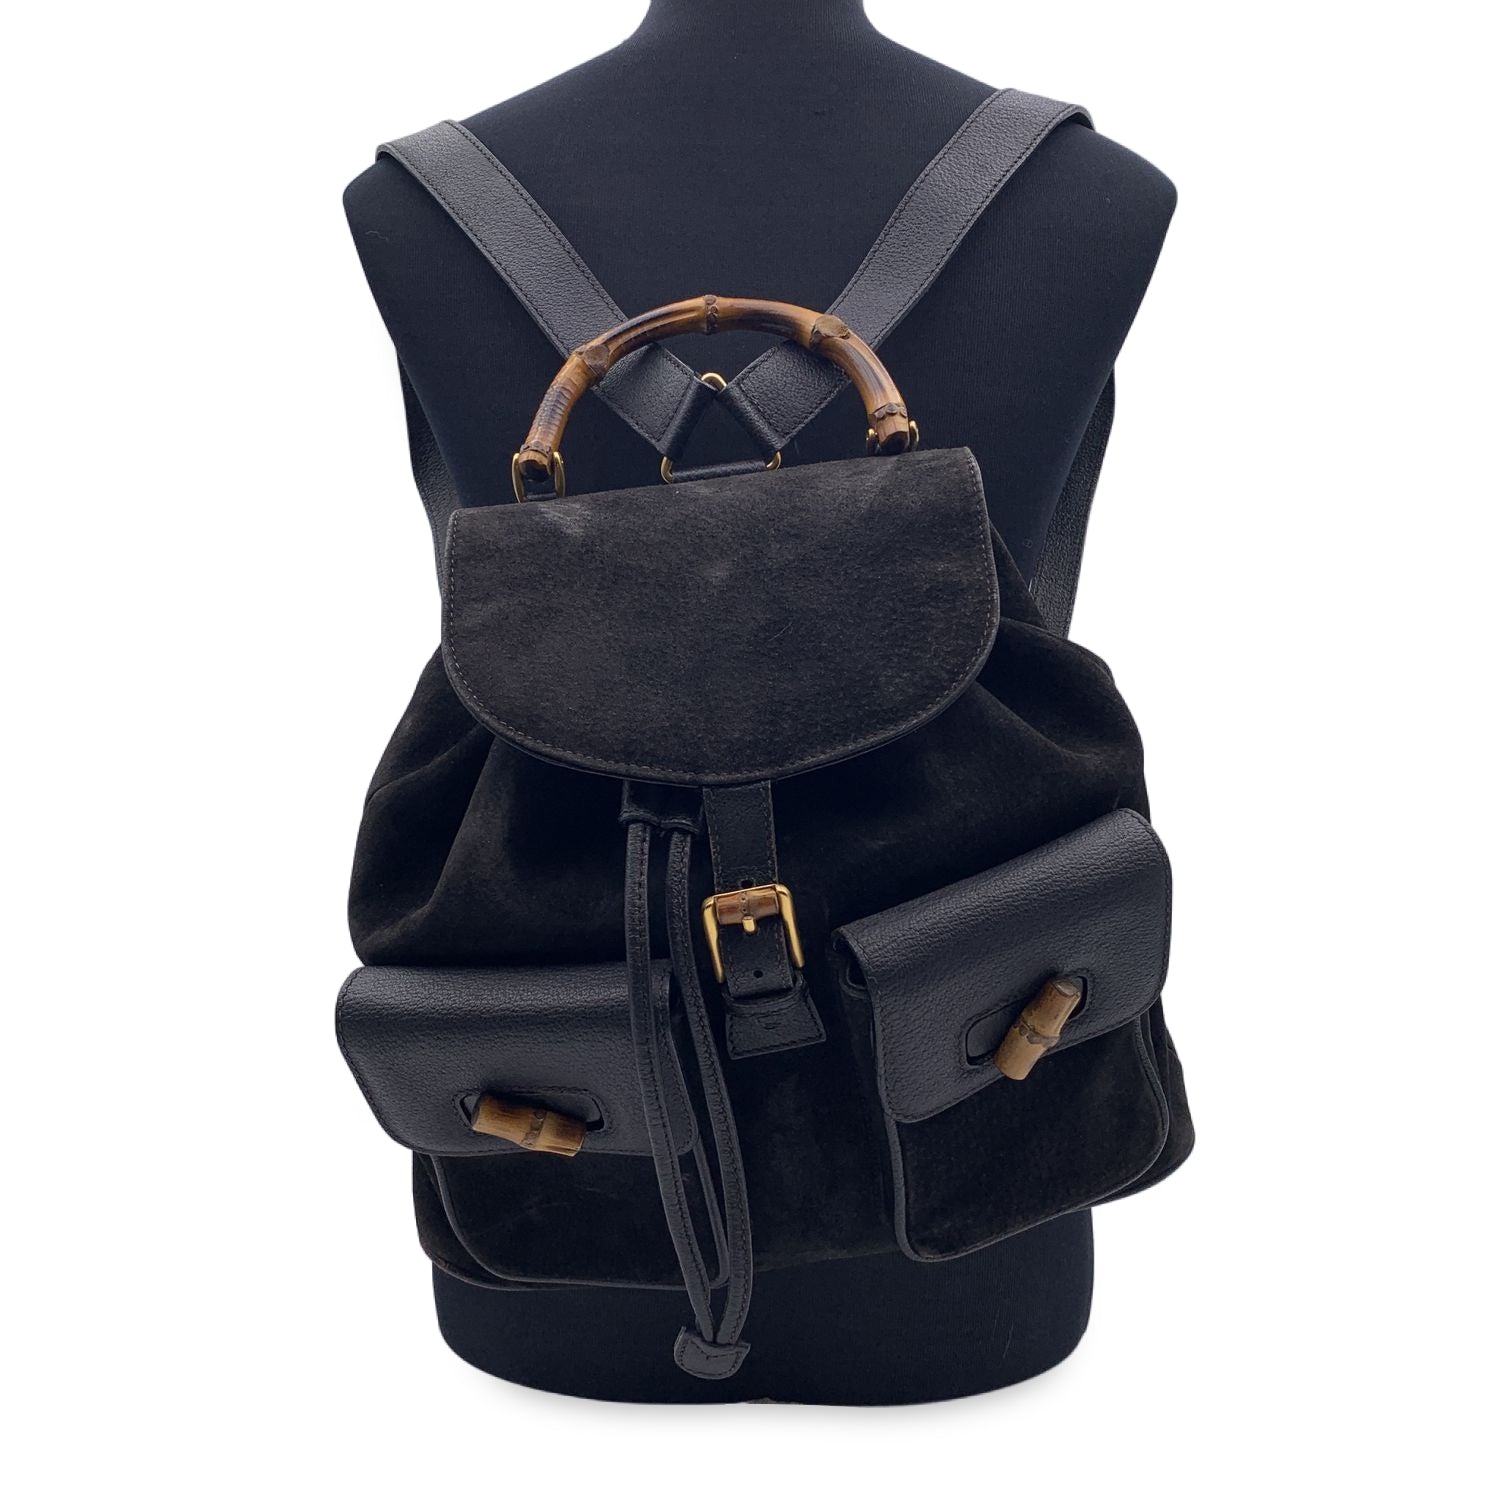 GUCCI SIGNATURE LEATHER WEB NAVY BACKPACK - CRTBLNCHSHP